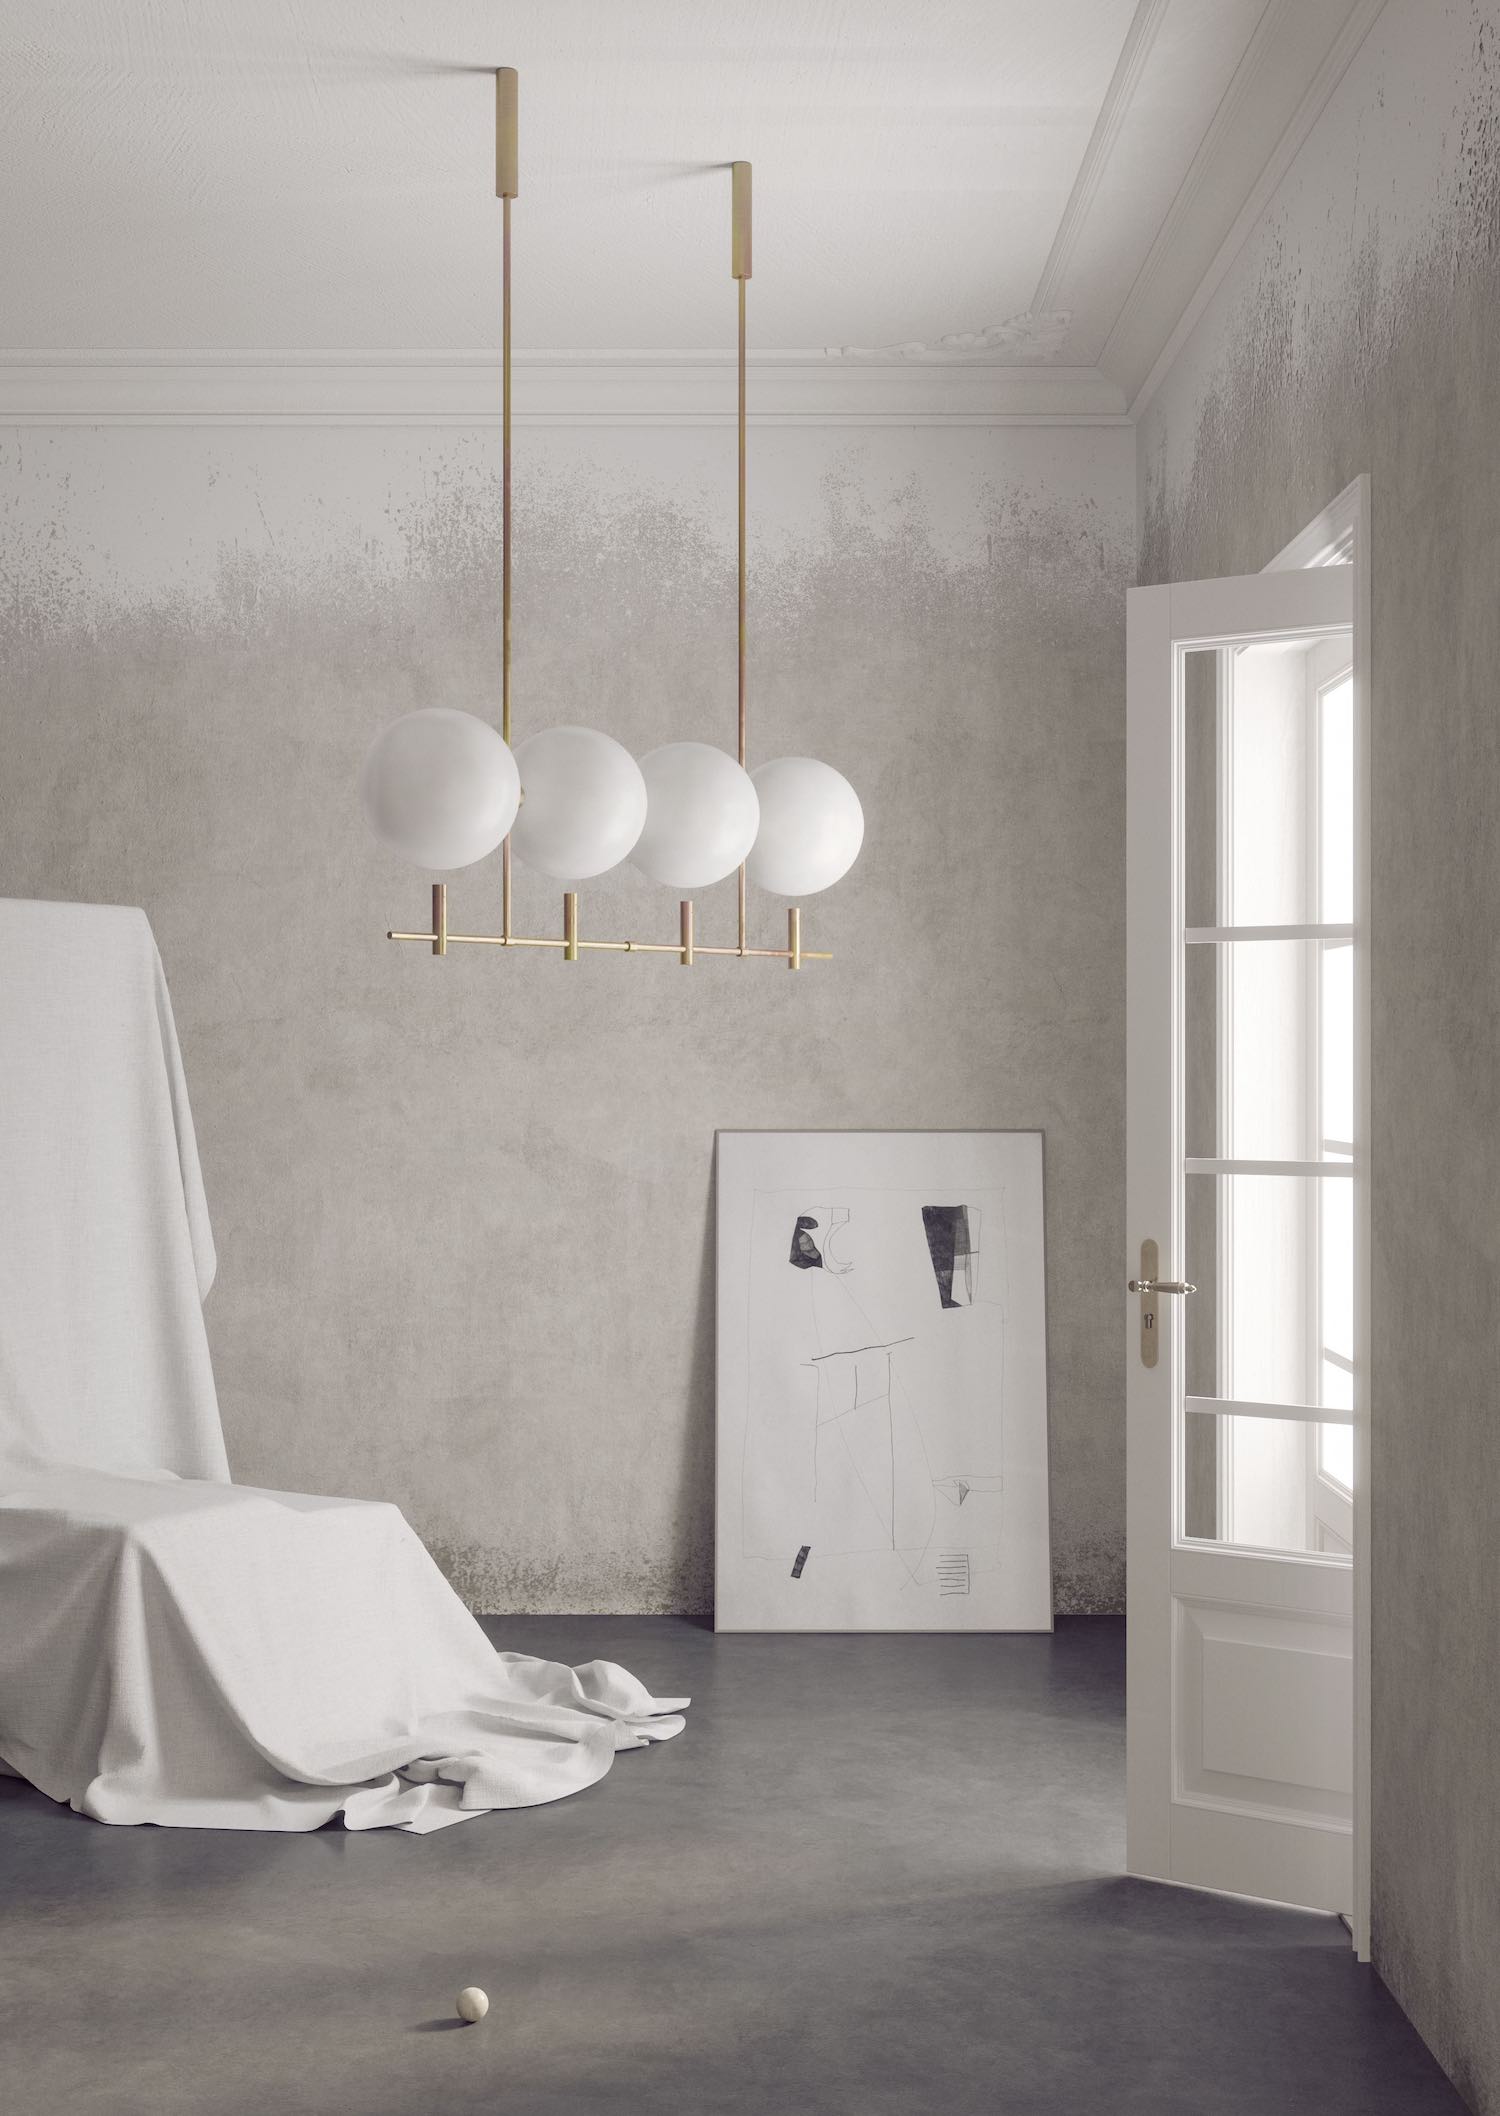 Luna-luminaries-collection-of-lighting-made-of-glass-in-combination-with-brass-hand-crafted-and-designed-locally-in-the-czech-republic-design-by-jiri-krejcirik-dimmable-led-sources-direct-and-ambient-interior-illumination-hand-crafted-in-czech-republic-